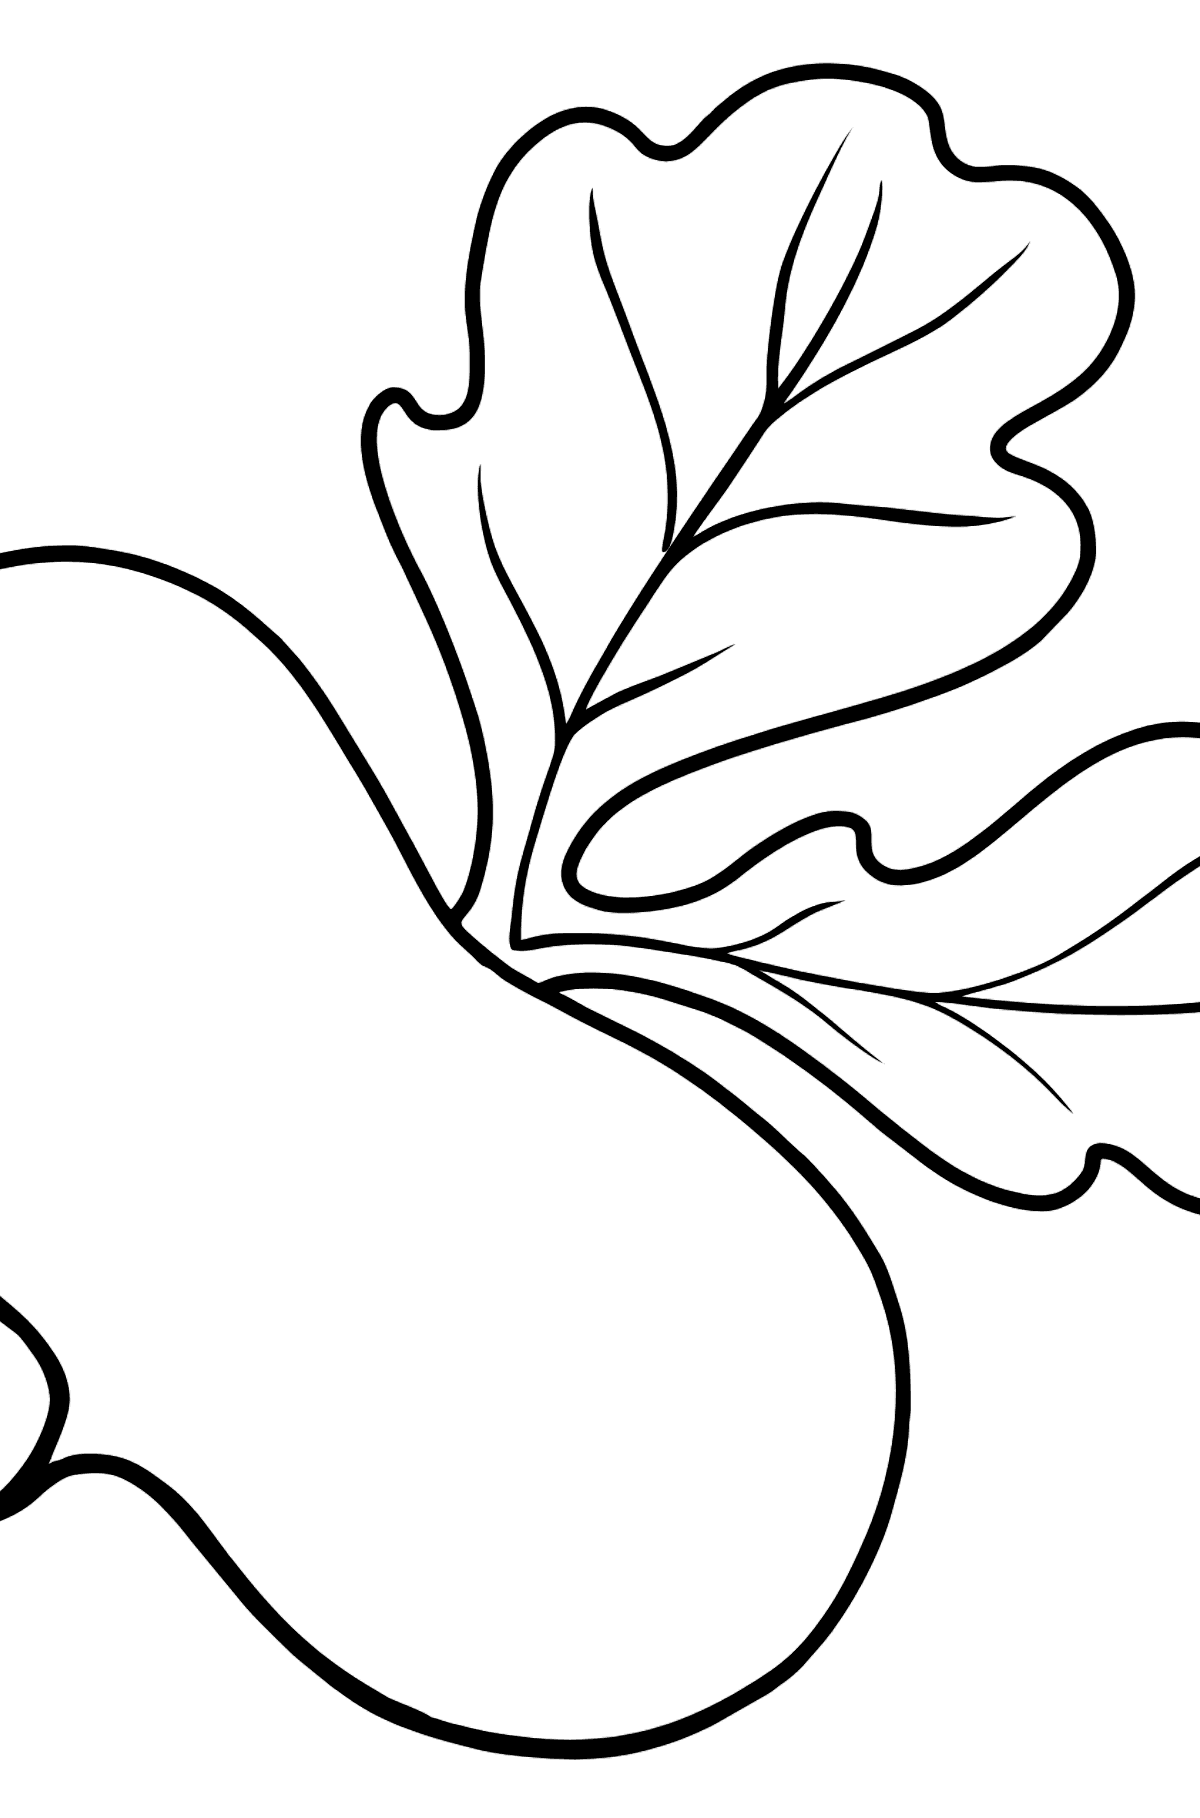 Turnip coloring page - Coloring Pages for Kids